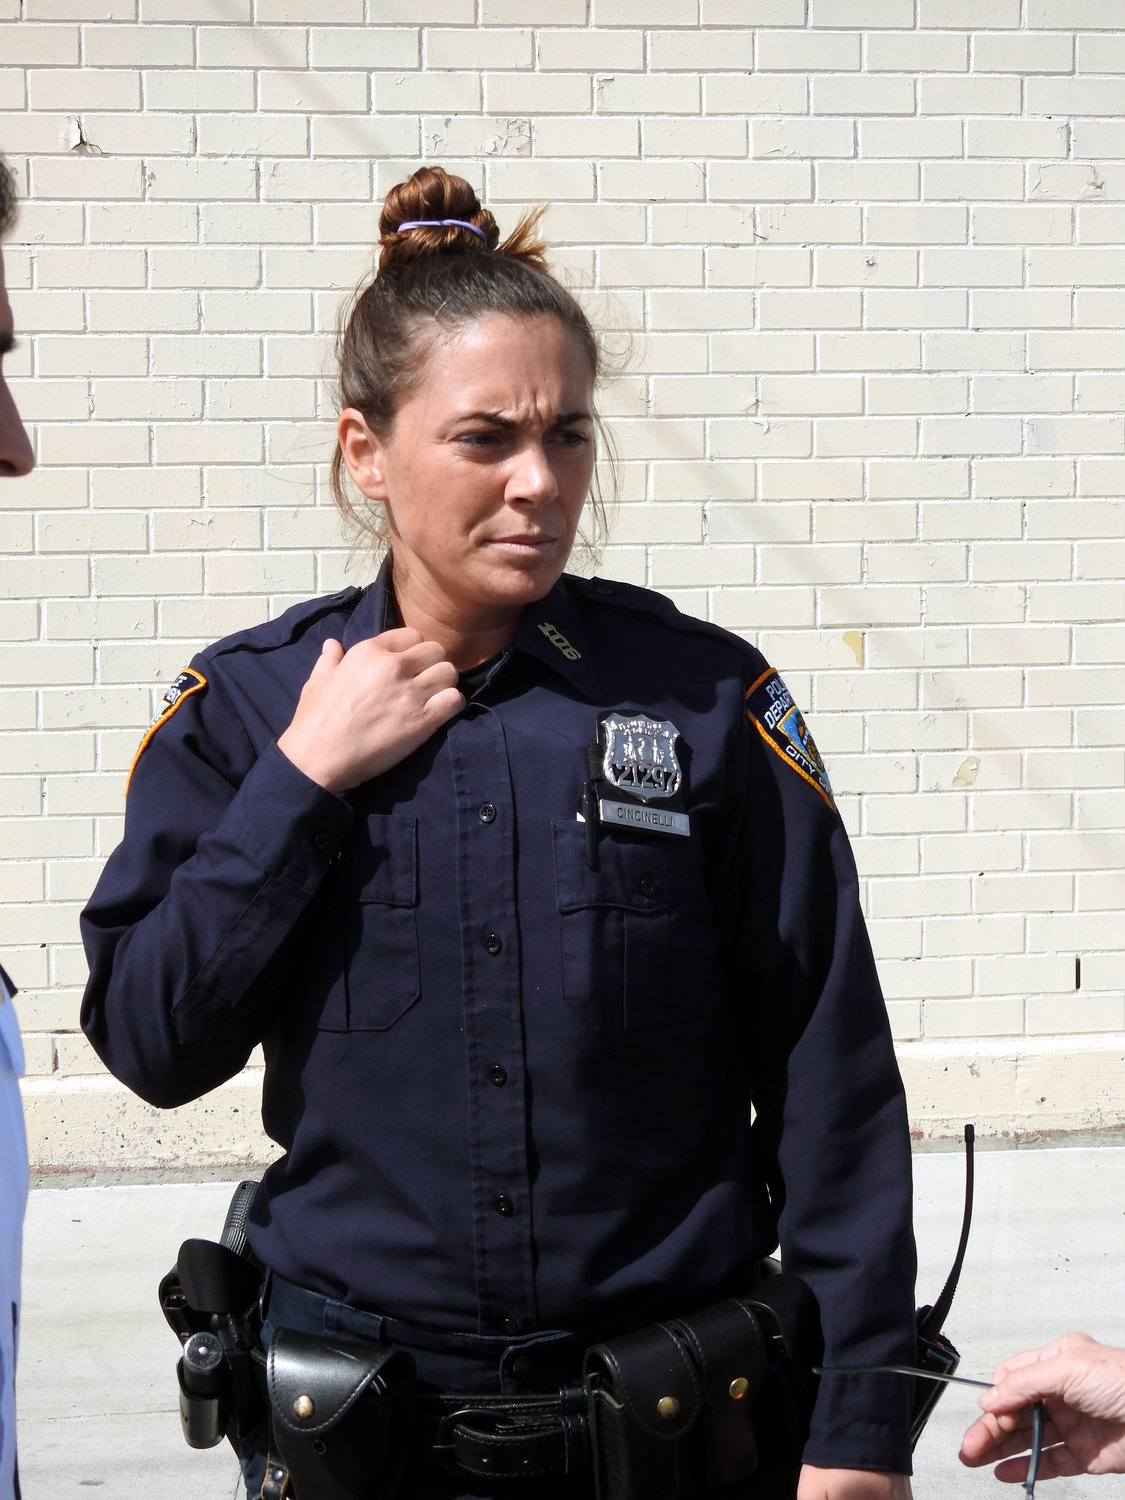 Oceanside resident and NYPD Officer Valerie Cincinelli was arrested on May 17 and charged with allegedly conspiring with her boyfriend to hire a hitman to kill her estranged ex-husband, Isaiah Carvalho Jr., and his own daughter.